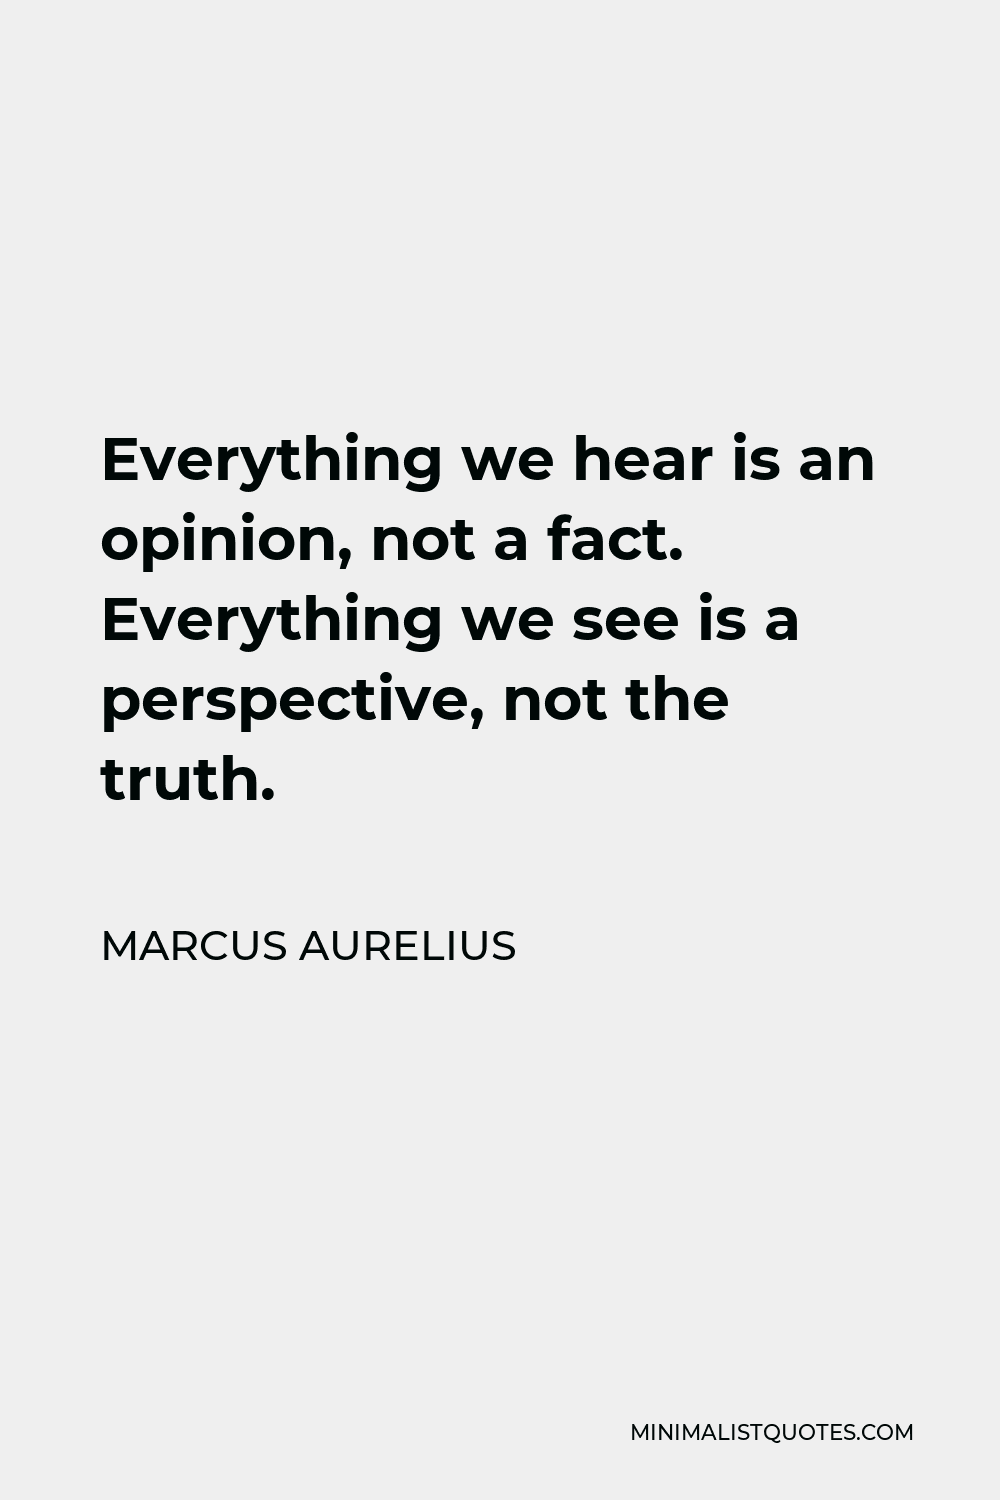 Marcus Aurelius Quote - Everything we hear is an opinion, not a fact. Everything we see is a perspective, not the truth.